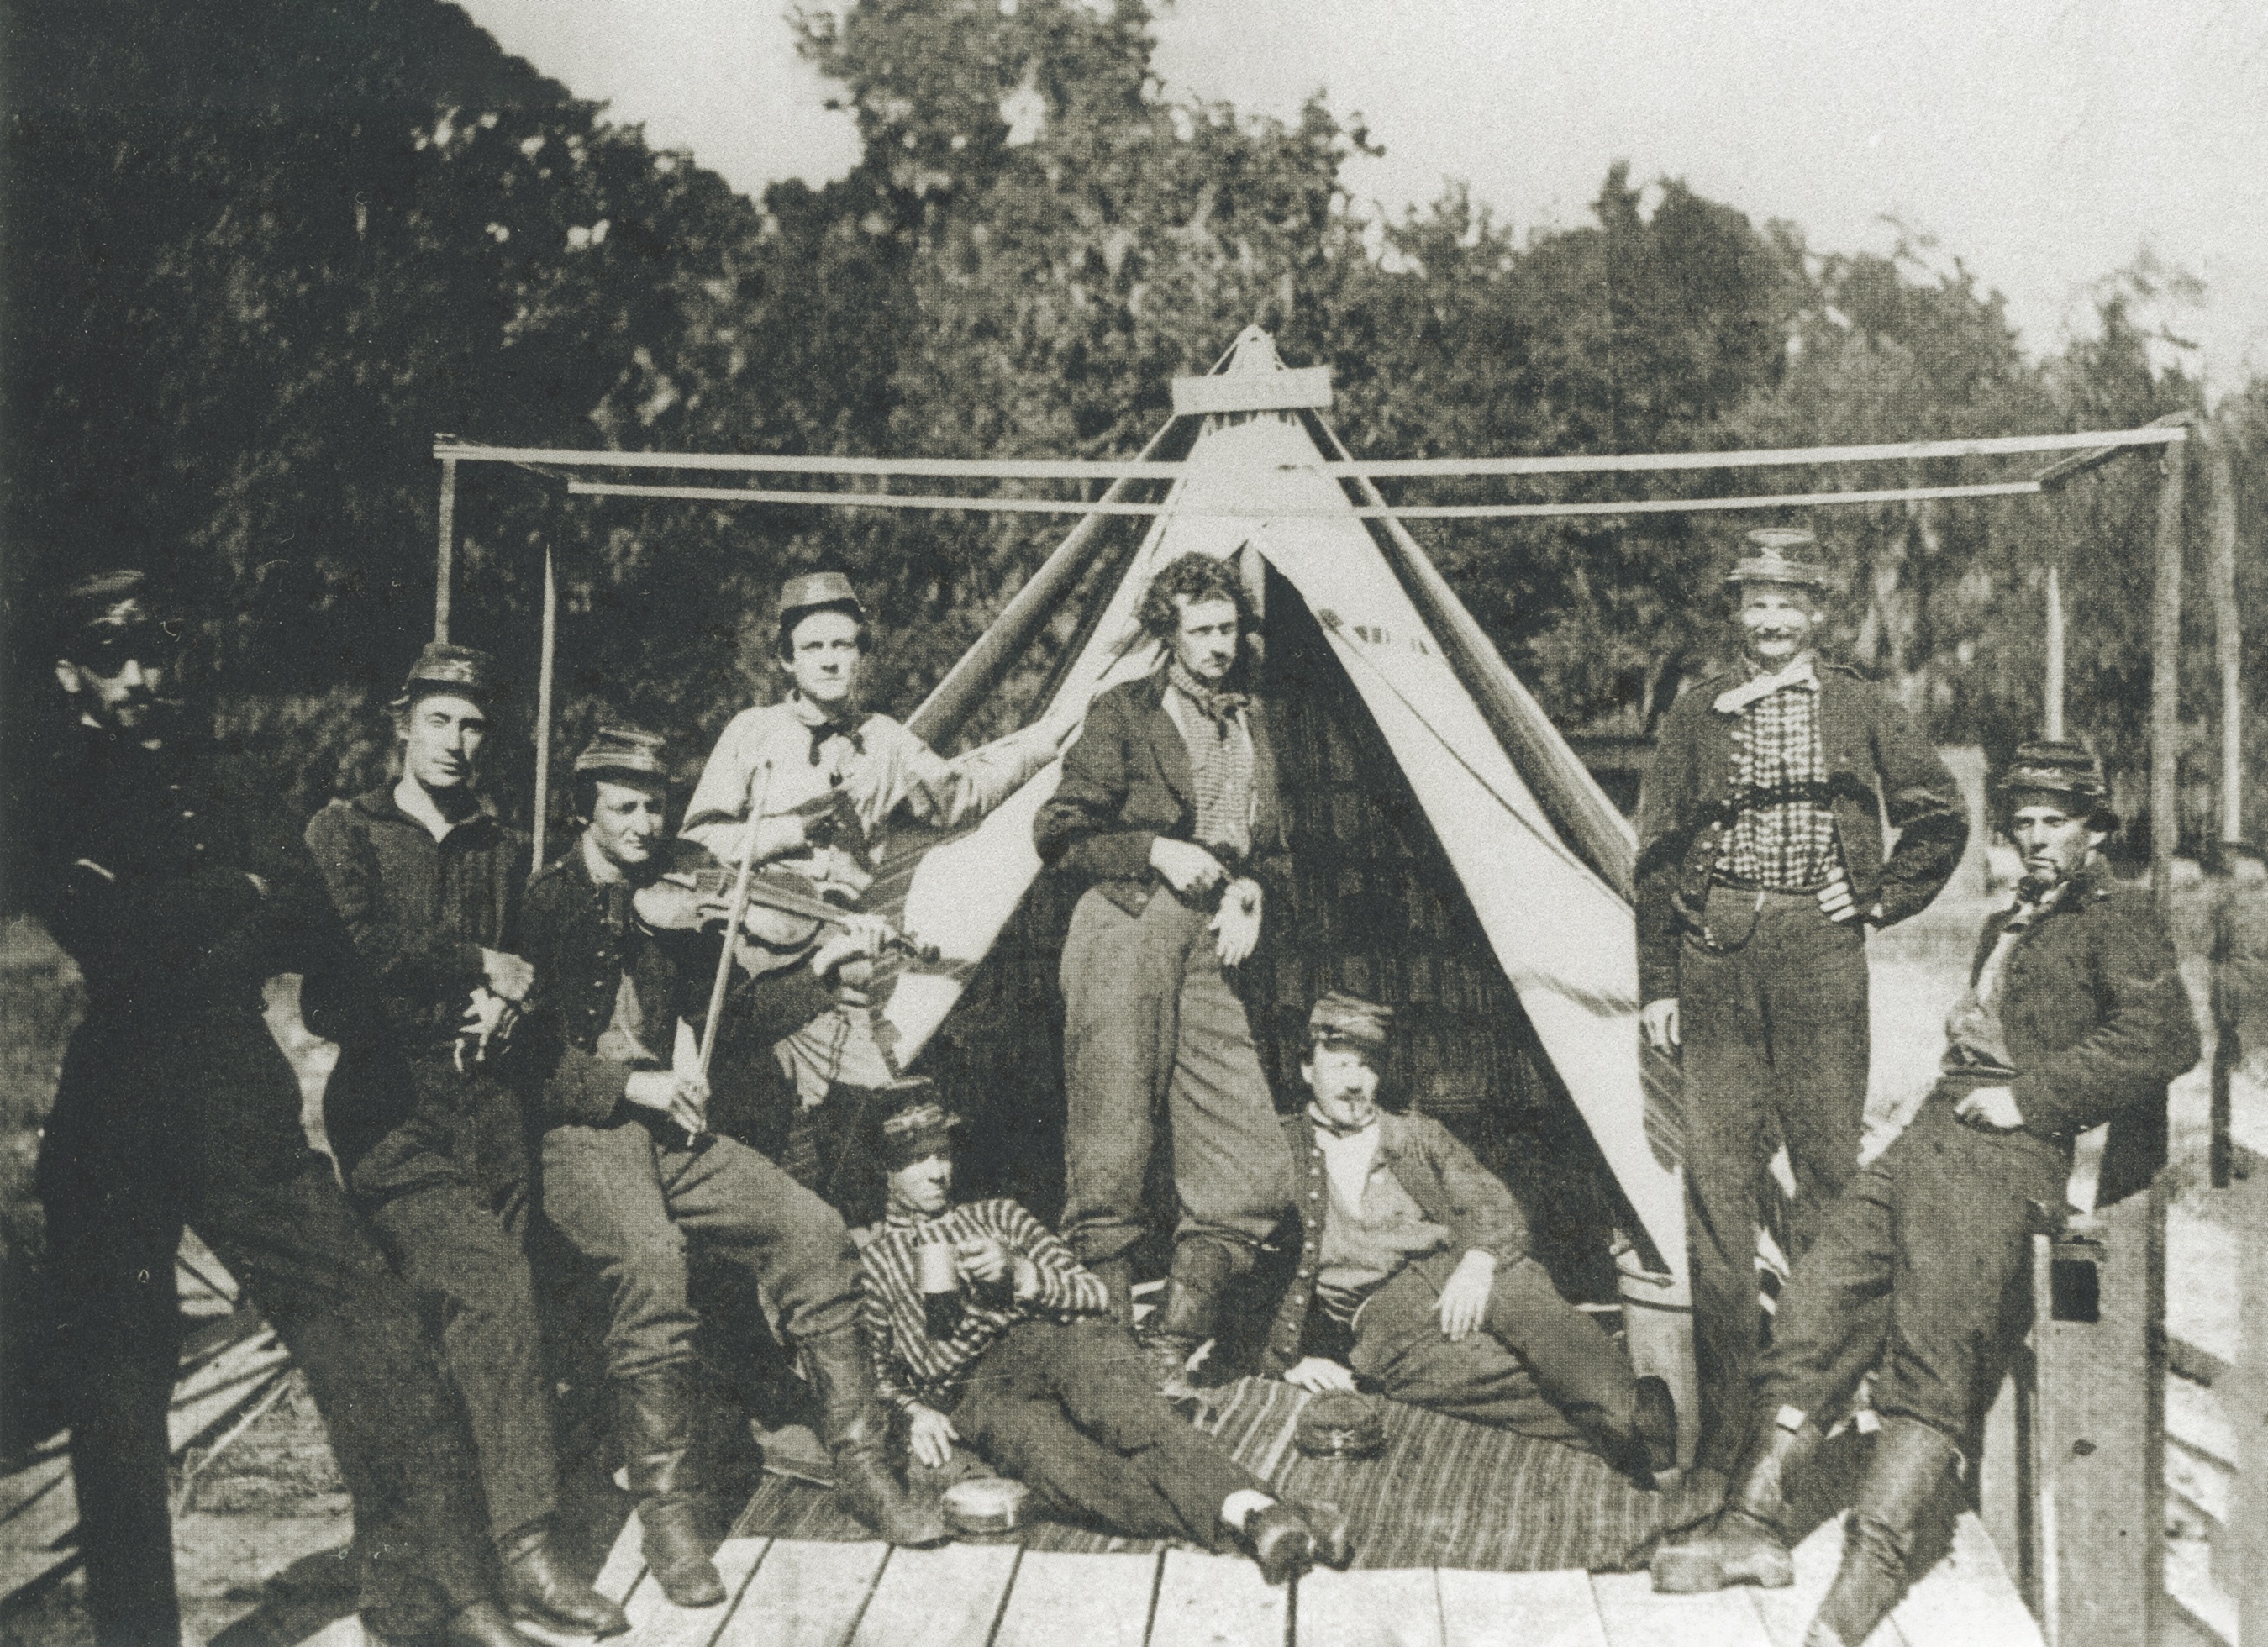 Washington Artillerymen relax in camp early in the war. A fiddle player alludes to the musical prowess of the unit, put on display during the Vicksburg Campaign. (USAHEC)